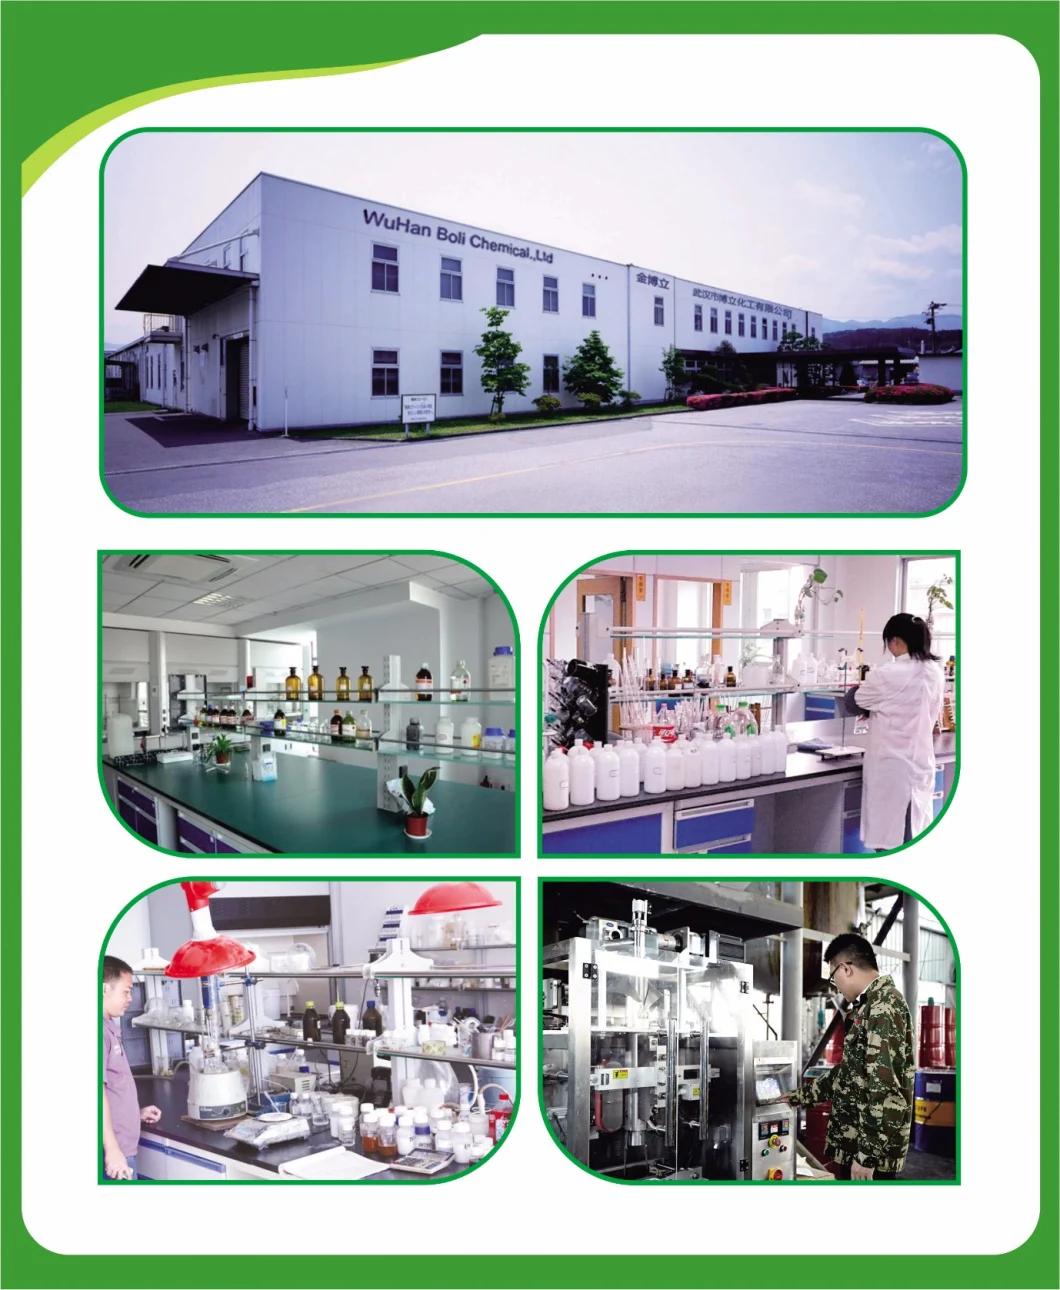 Constructional and Car Manufacturing Footwear Making Furniture Industry Favorite Good Low Cost Convenience Using Glue